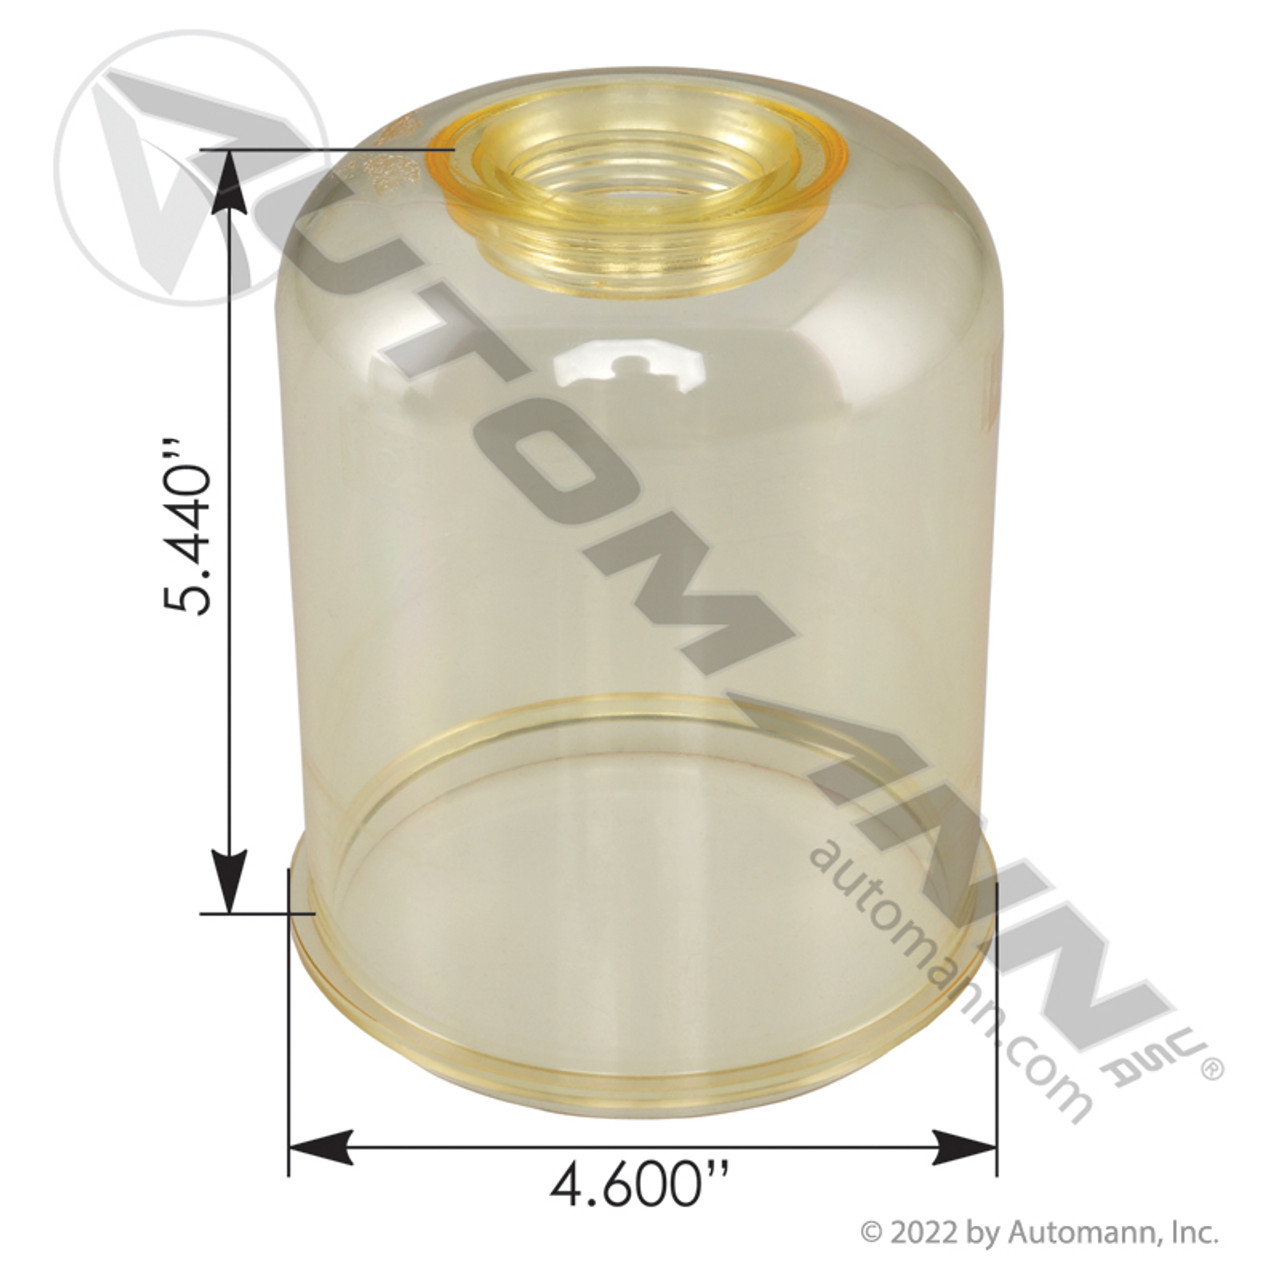 Davco 243 Fuel Filter Bowl / Cover Replacement